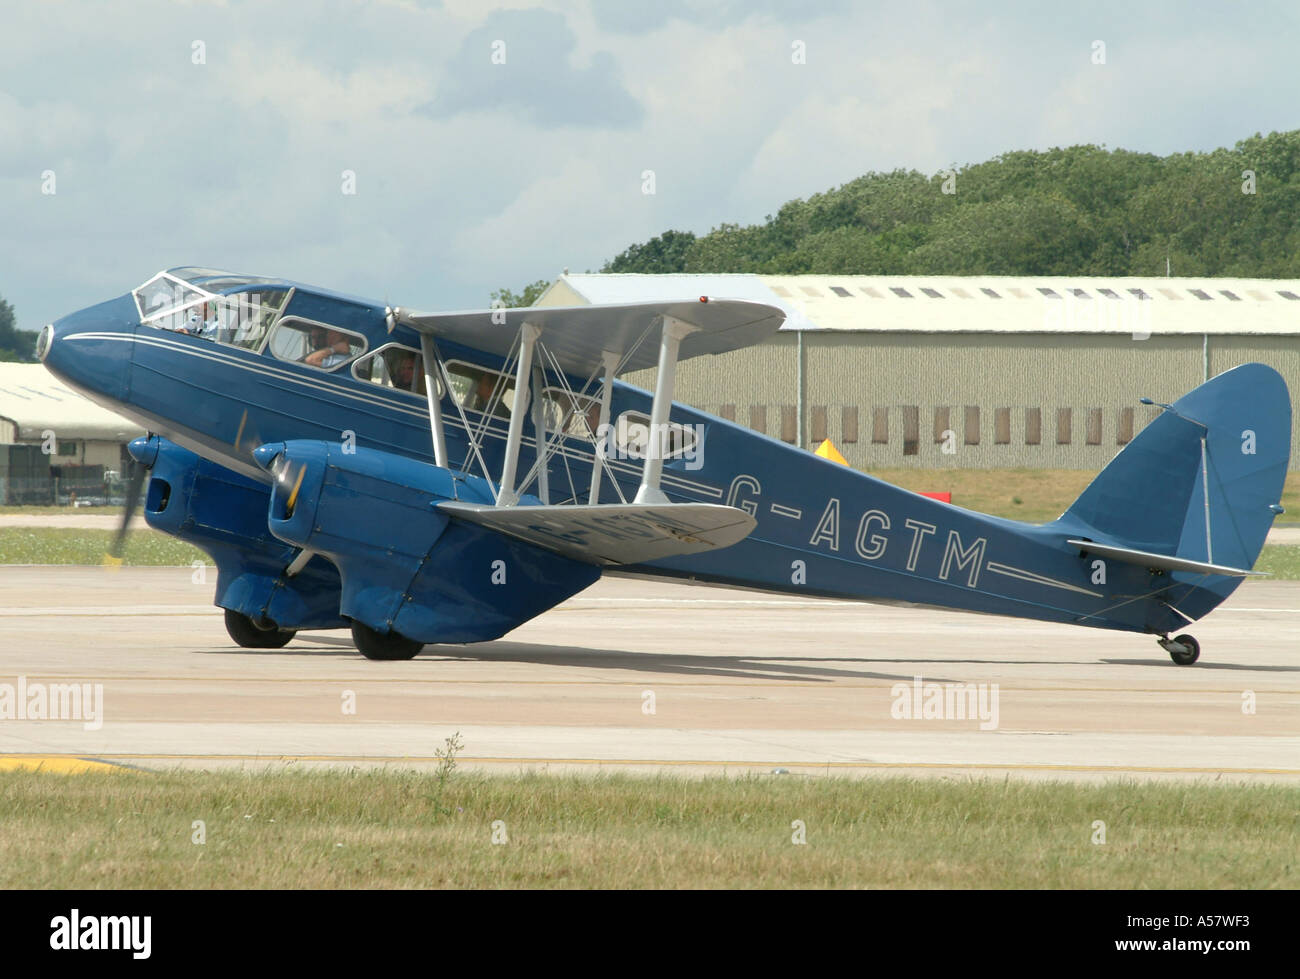 DH Rapide RIAT 2003 Fairford Foto Stock